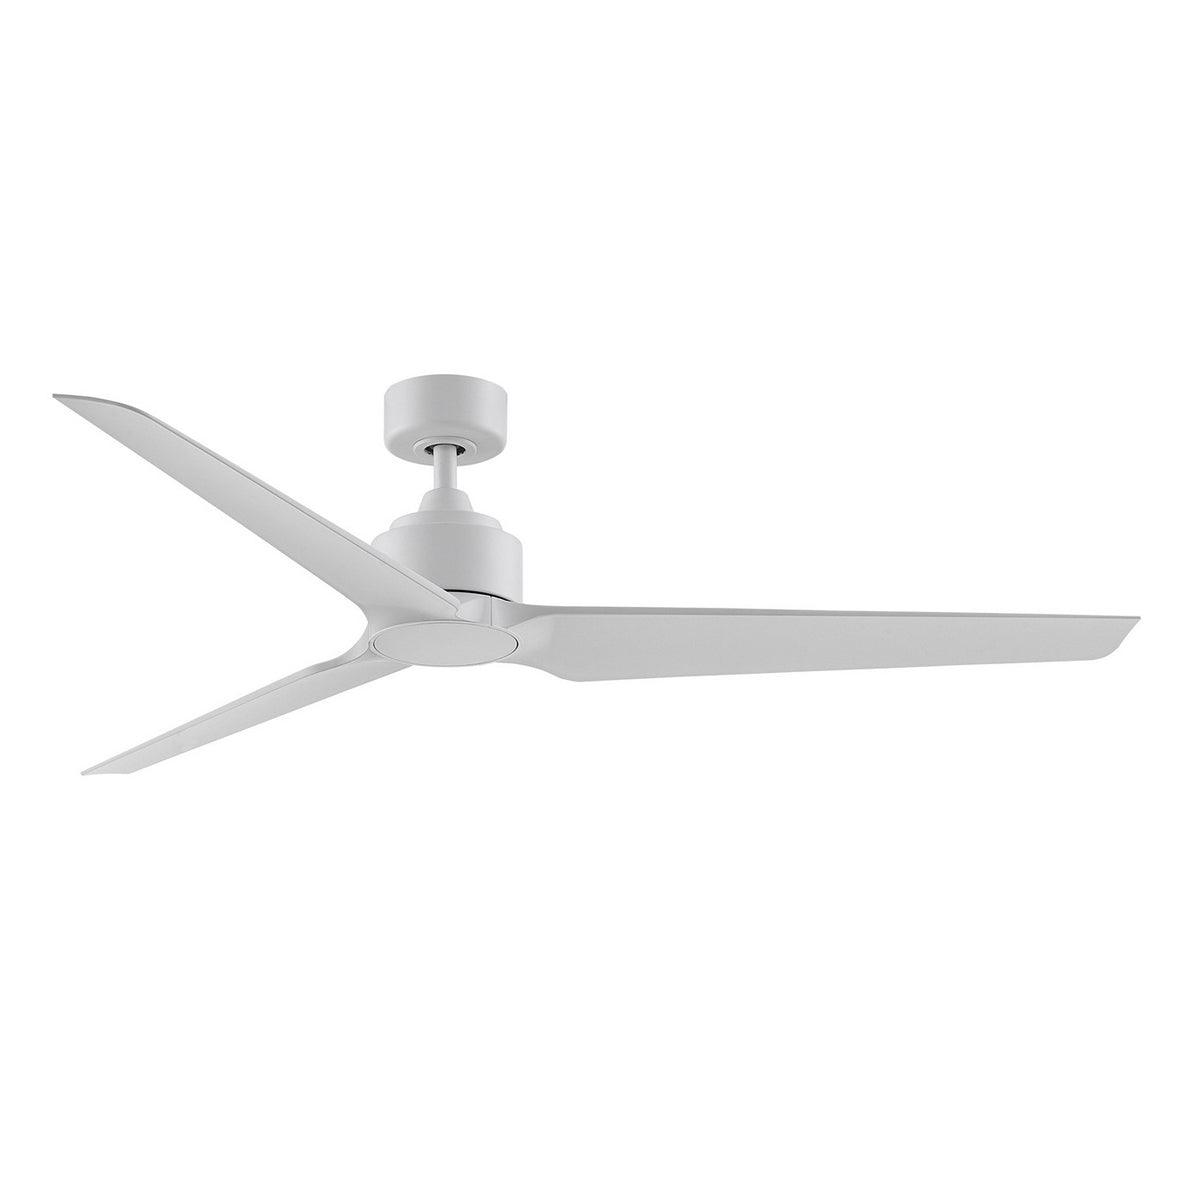 TriAire Custom Outdoor Ceiling Fan Motor With Remote, Set of 3 Blades (64 - 84 Inch) Sold Separately